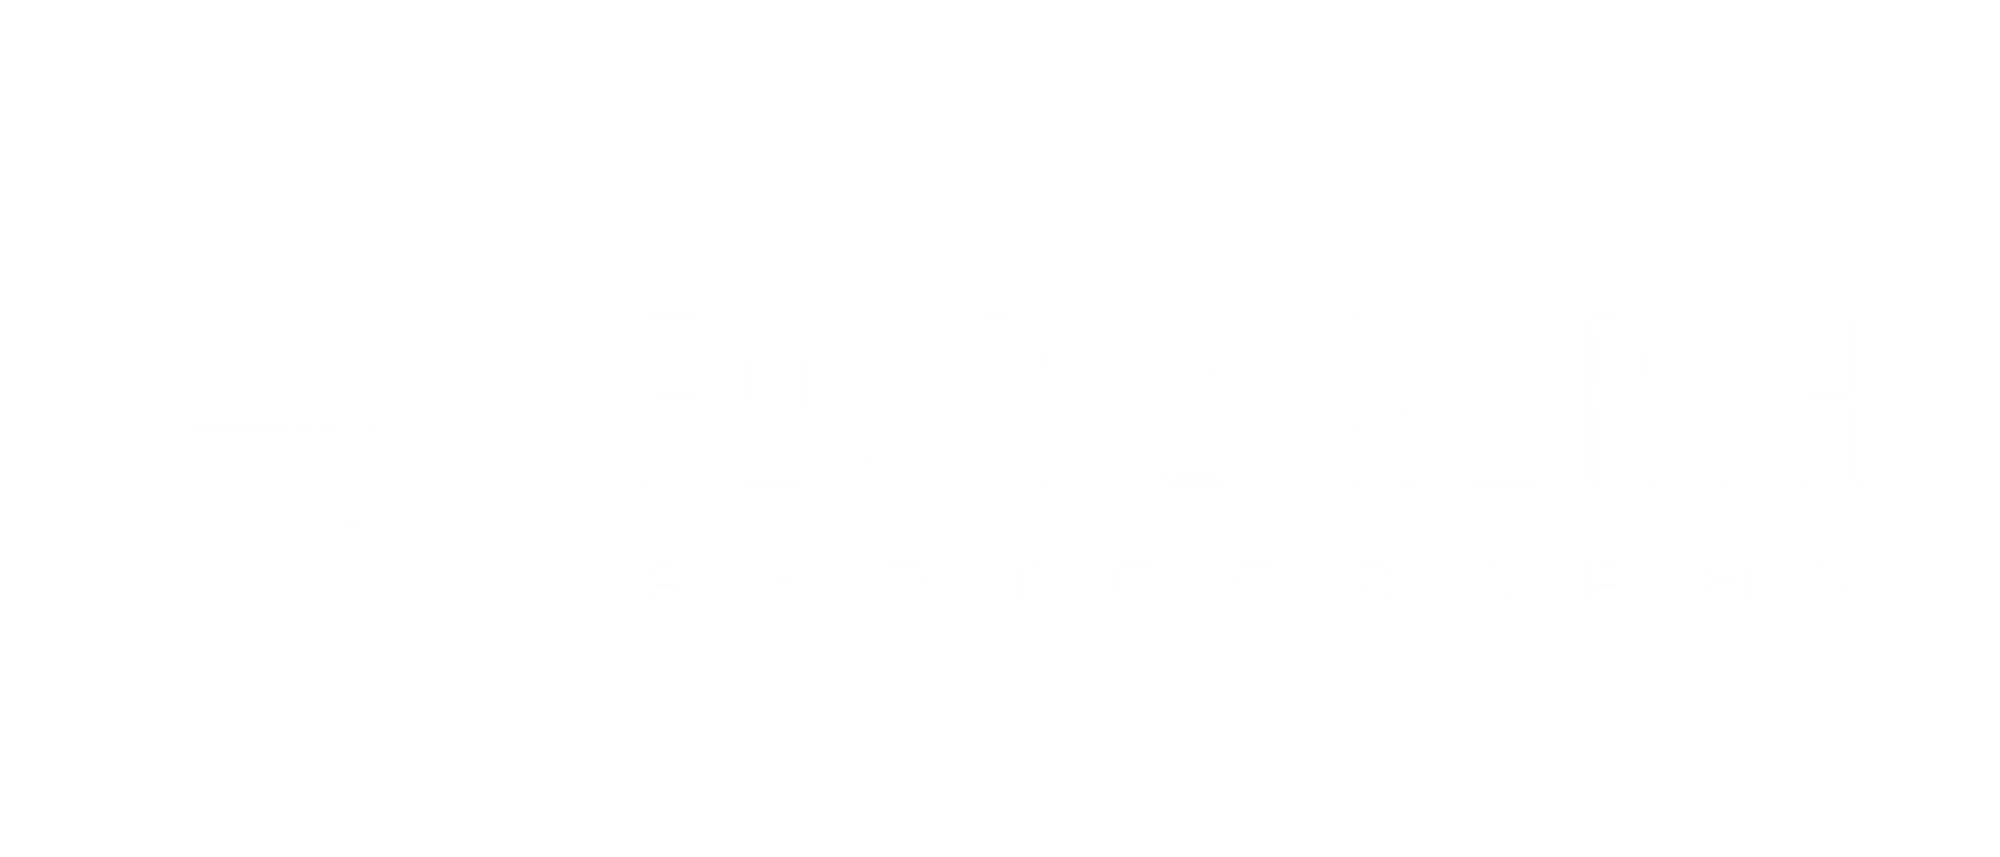 Four 2 North Photography site logo - 001